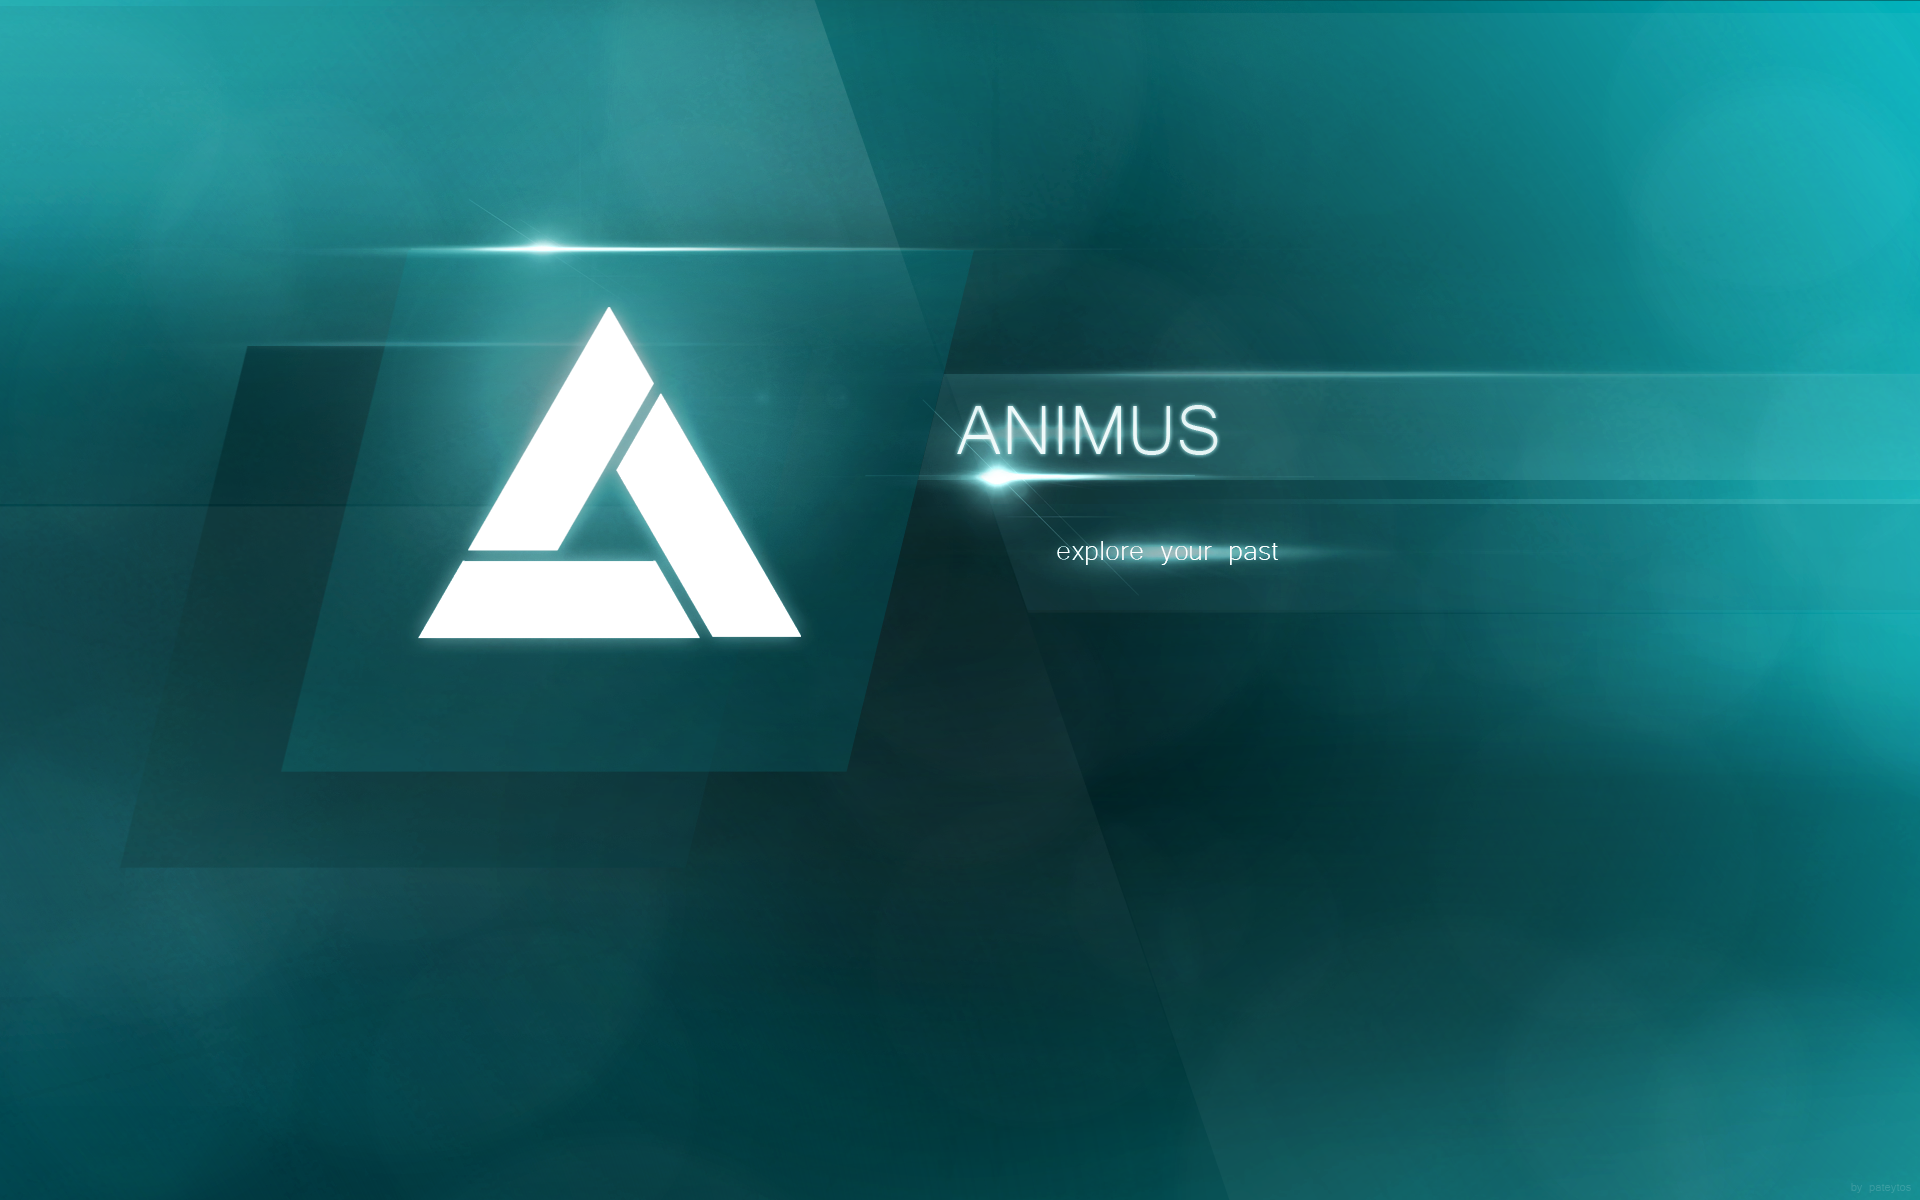 ac4_animus_by_pateytos-d6d14yt.png